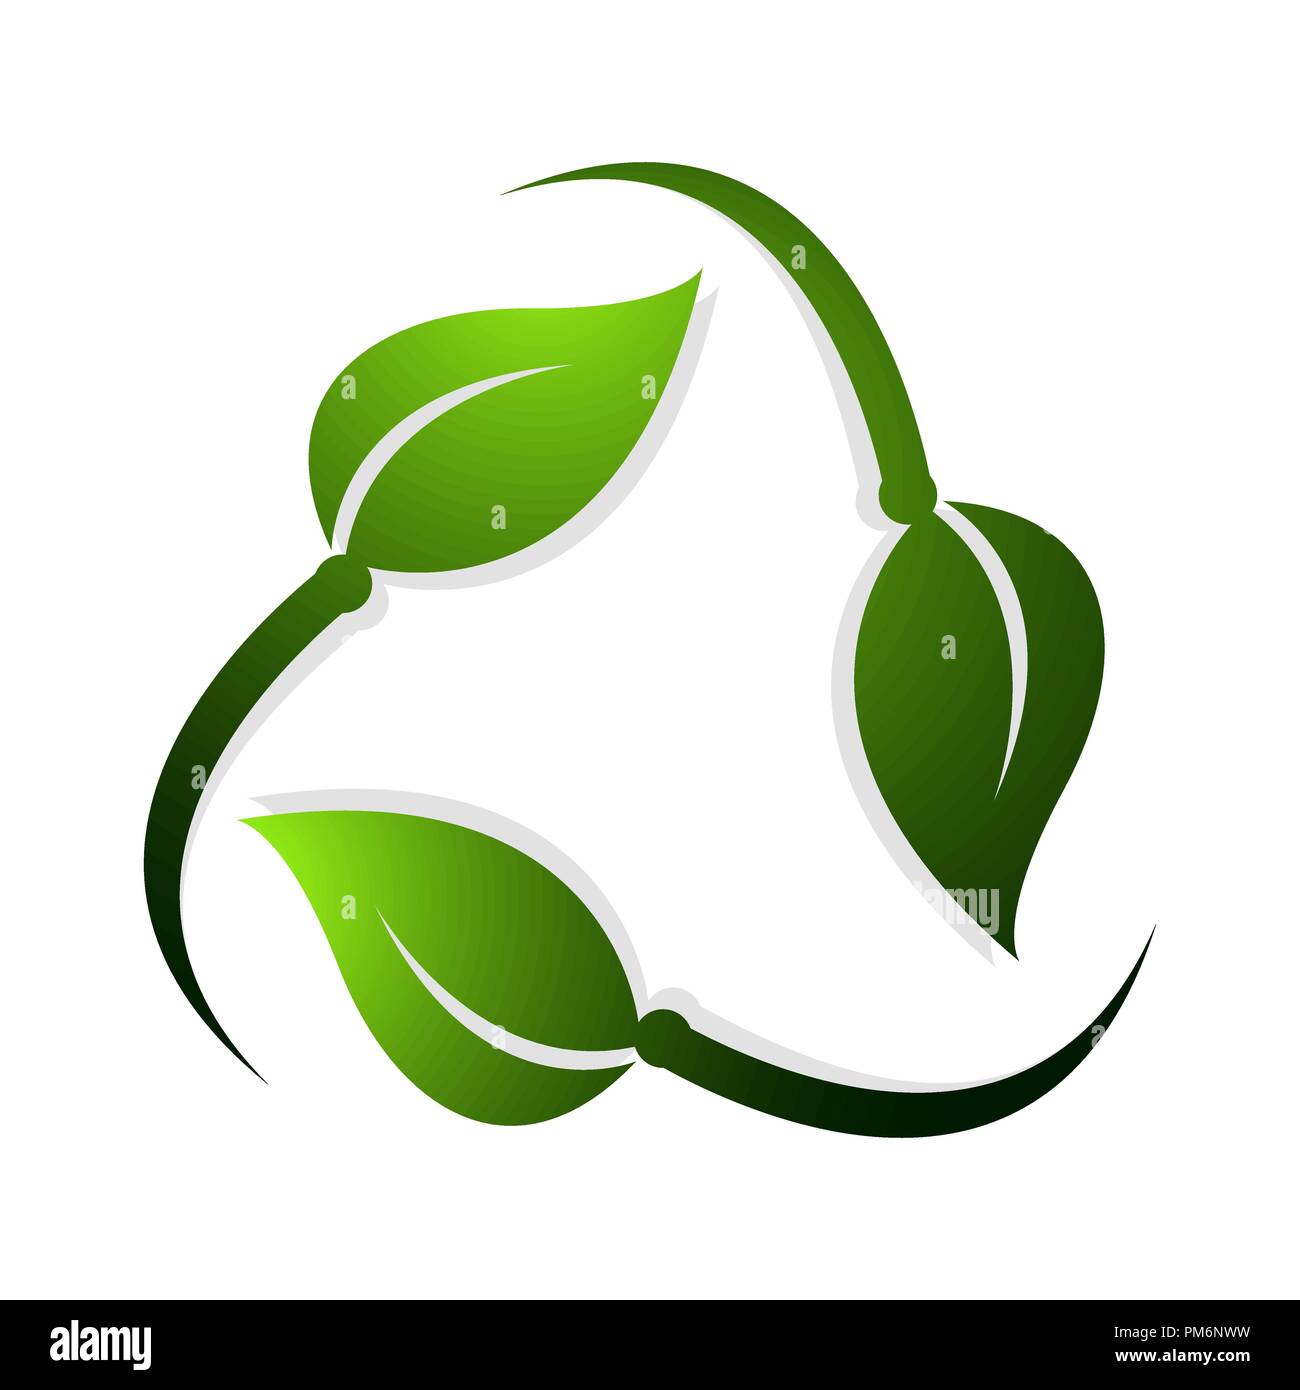 Recycle symbol made of green rotating leaves. Recycle leaf vector design Stock Vector